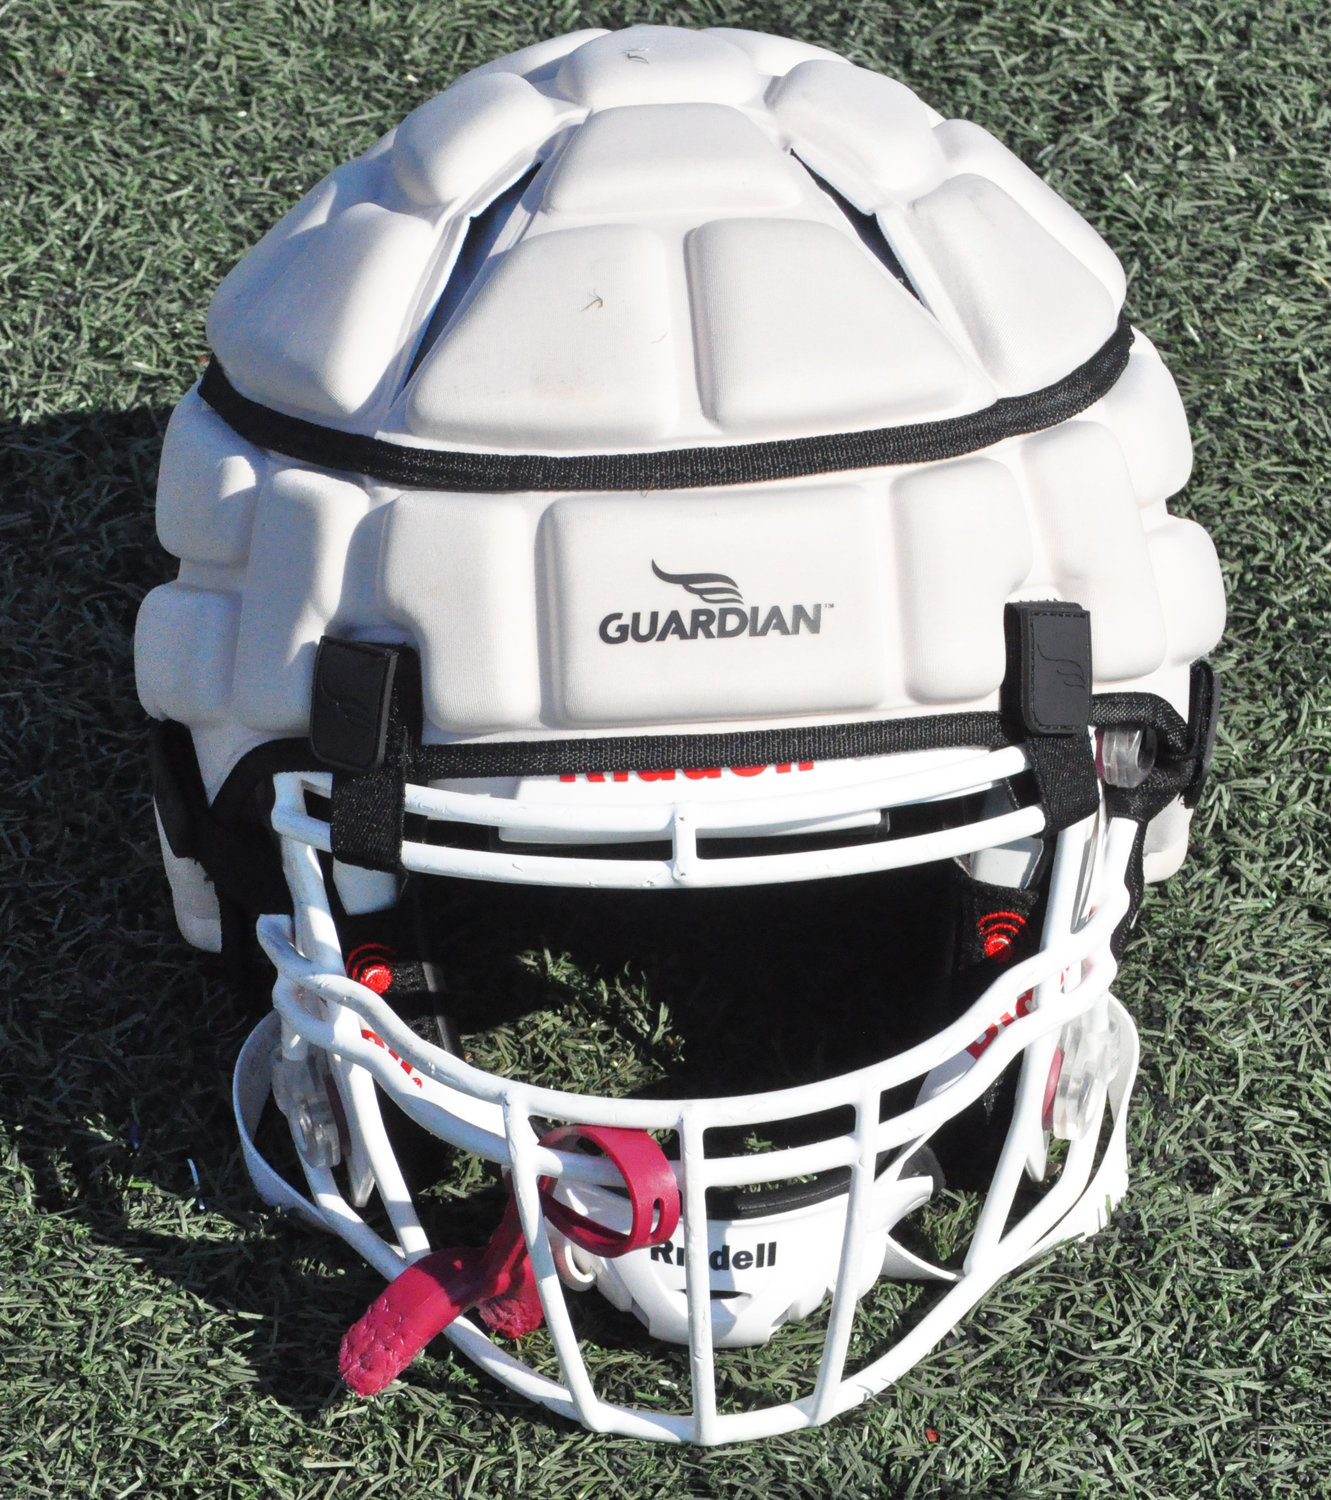 The caps reduce the force of impact a football player endures when they fall to the ground. It fastens onto the outside of the helmet with Velcro straps.